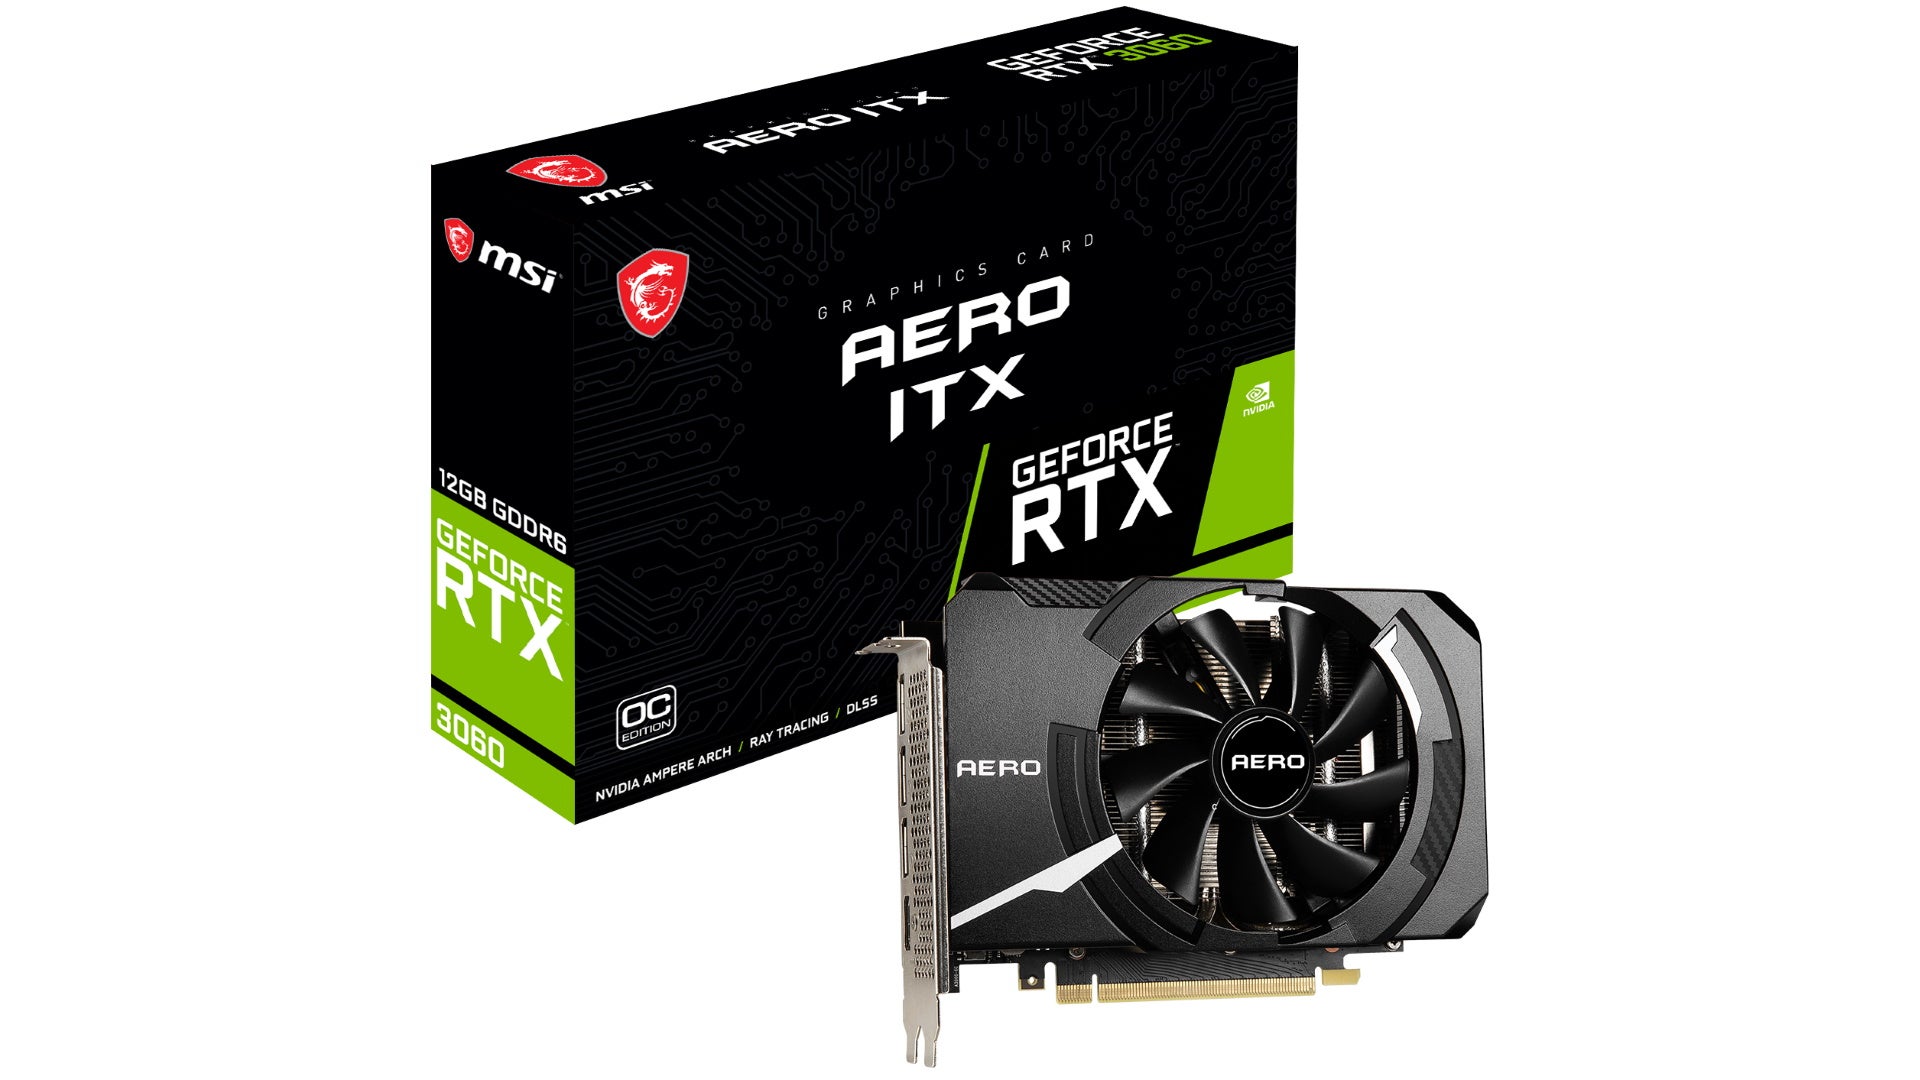 MSI RTX 3060 Aero ITX OC product photo showing the card and box